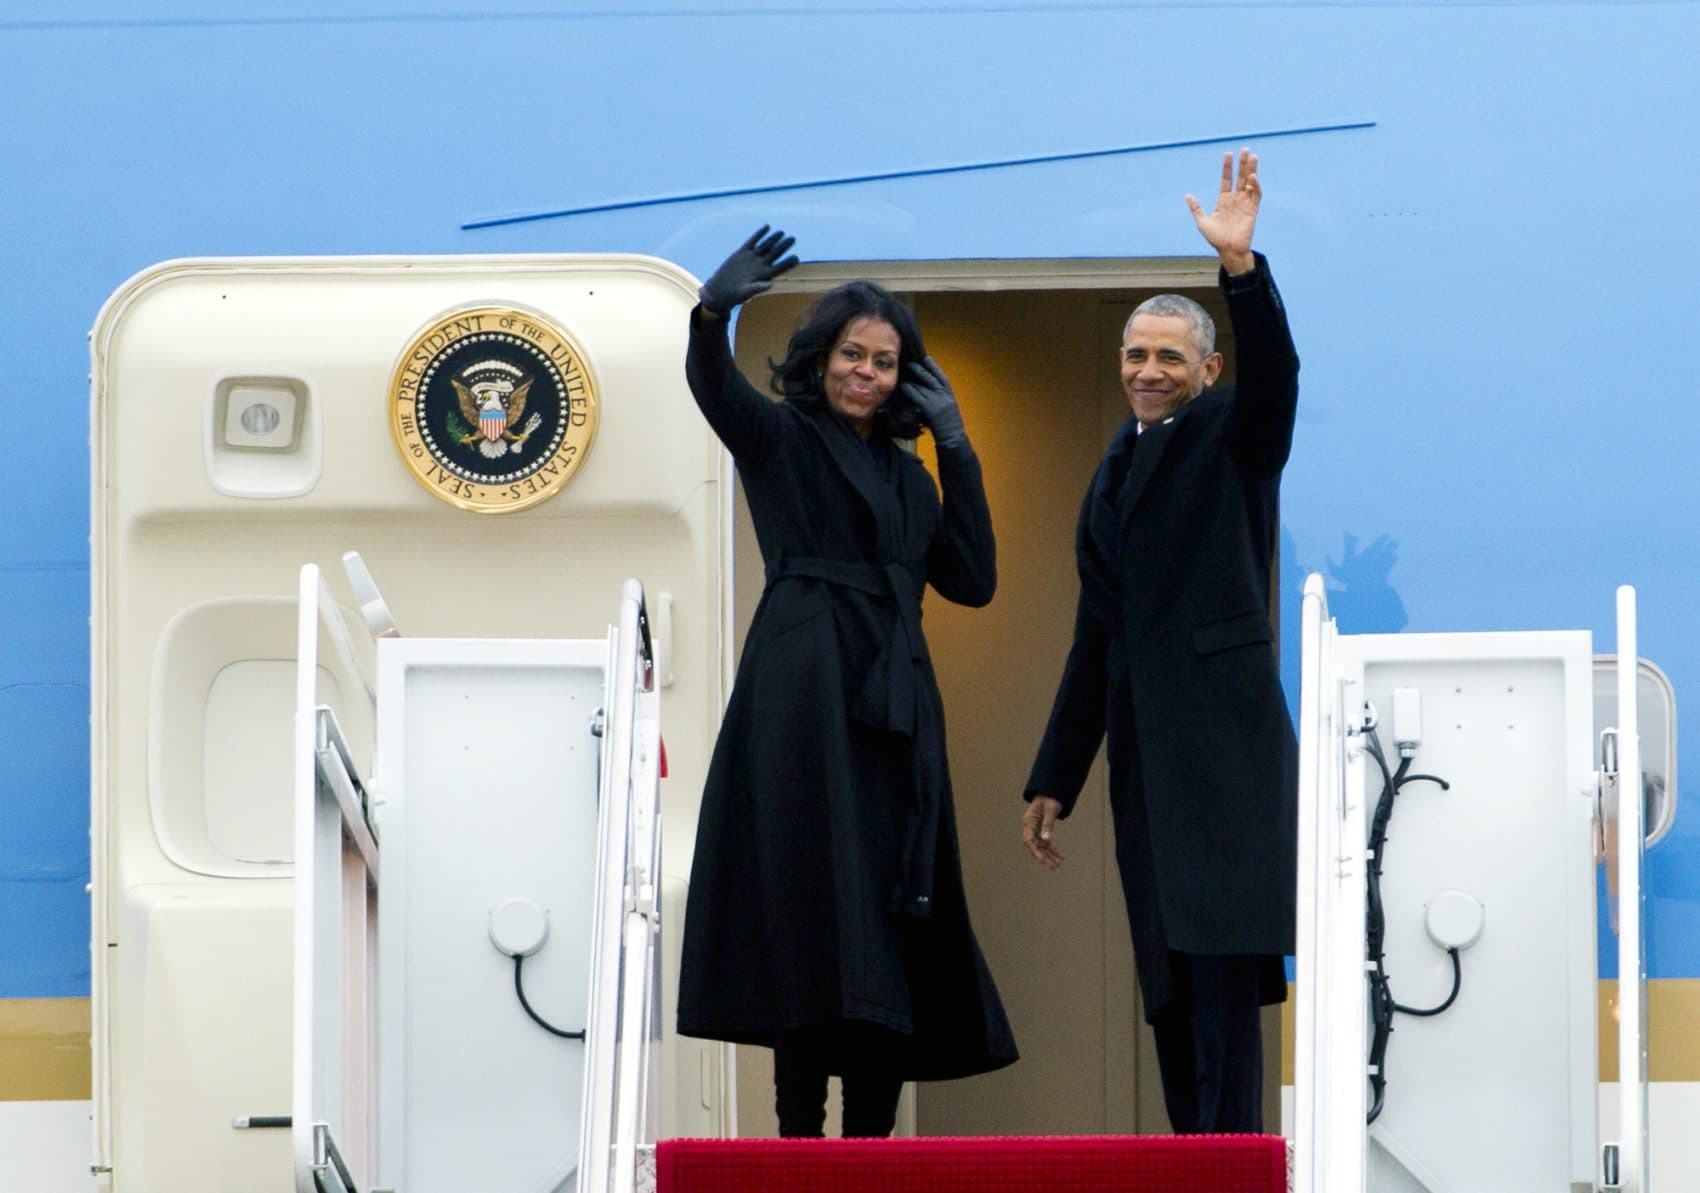 The First Lady’s platform, writes Joanna Weiss, has become increasingly powerful, a way to move markets, change minds, and set a standard for a nation full of girls.
Pictured: President Barack Obama and First Lady Michelle Obama wave from Air Force One at Andrews Air Force Base, Md., Tuesday, Jan. 10, 2017.  (Jose Luis Magana/AP)